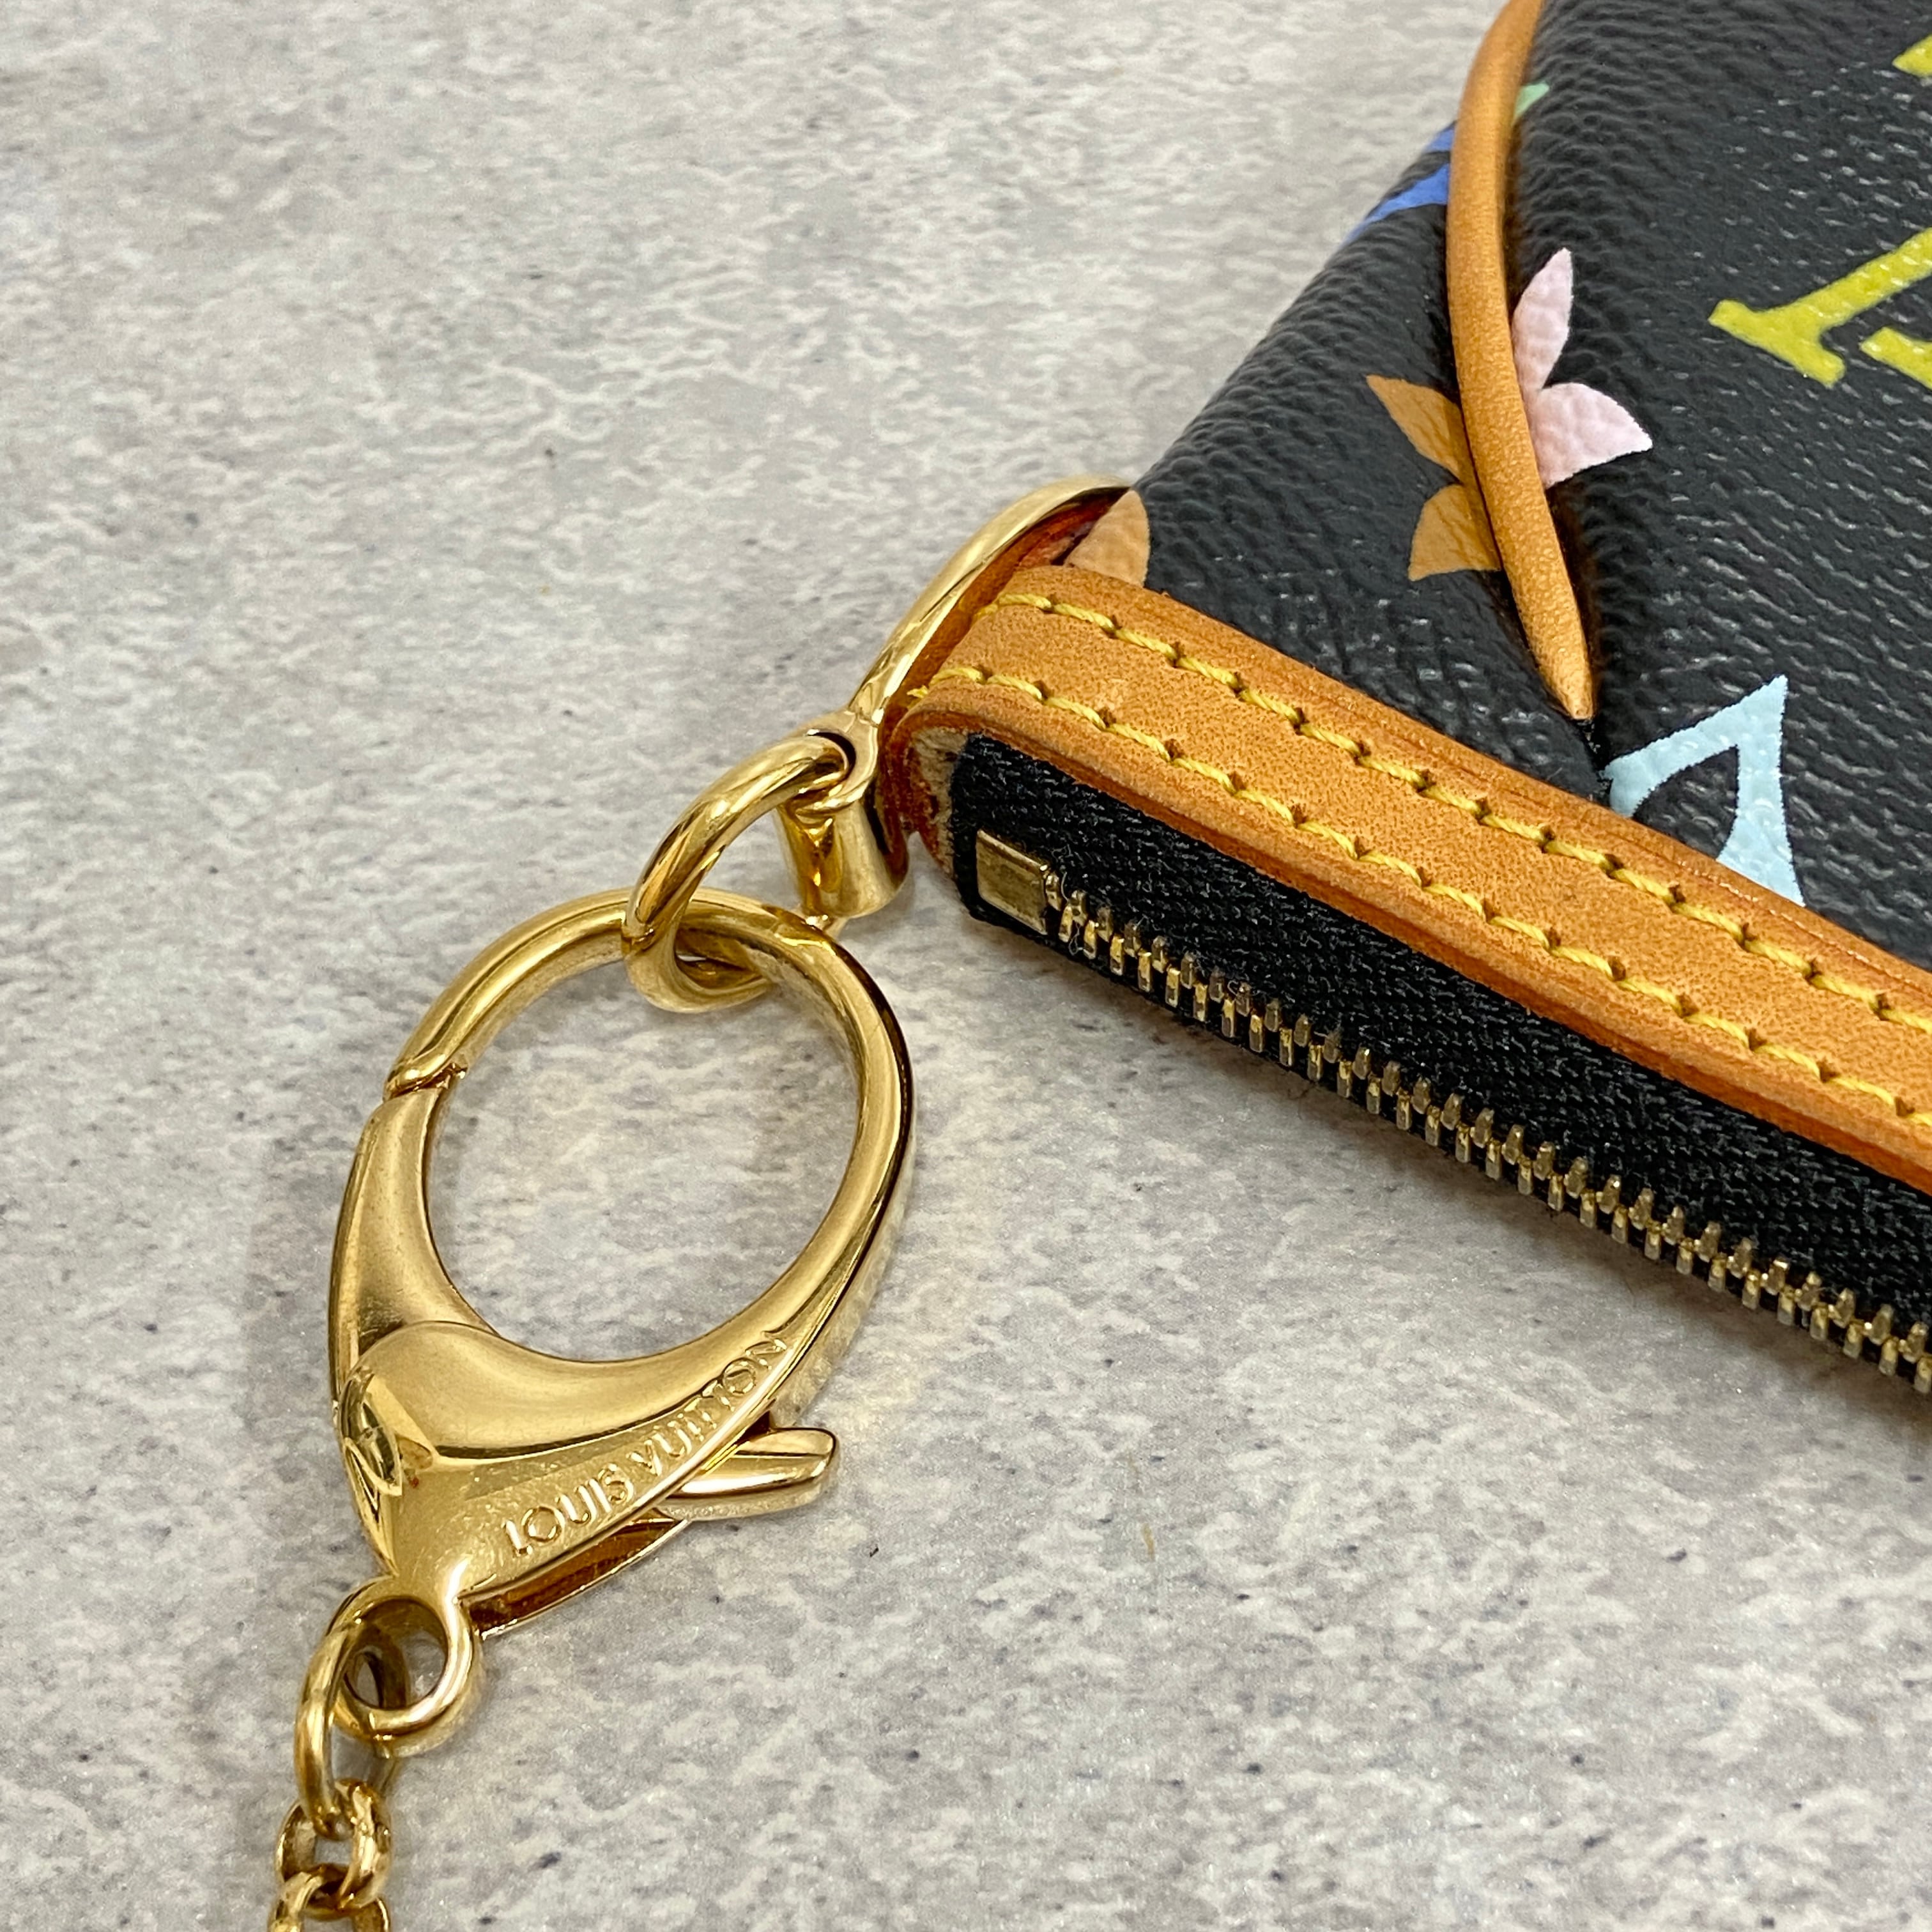 LOUIS VUITTON ポシェットMM キーリング付き ポーチ コインケース